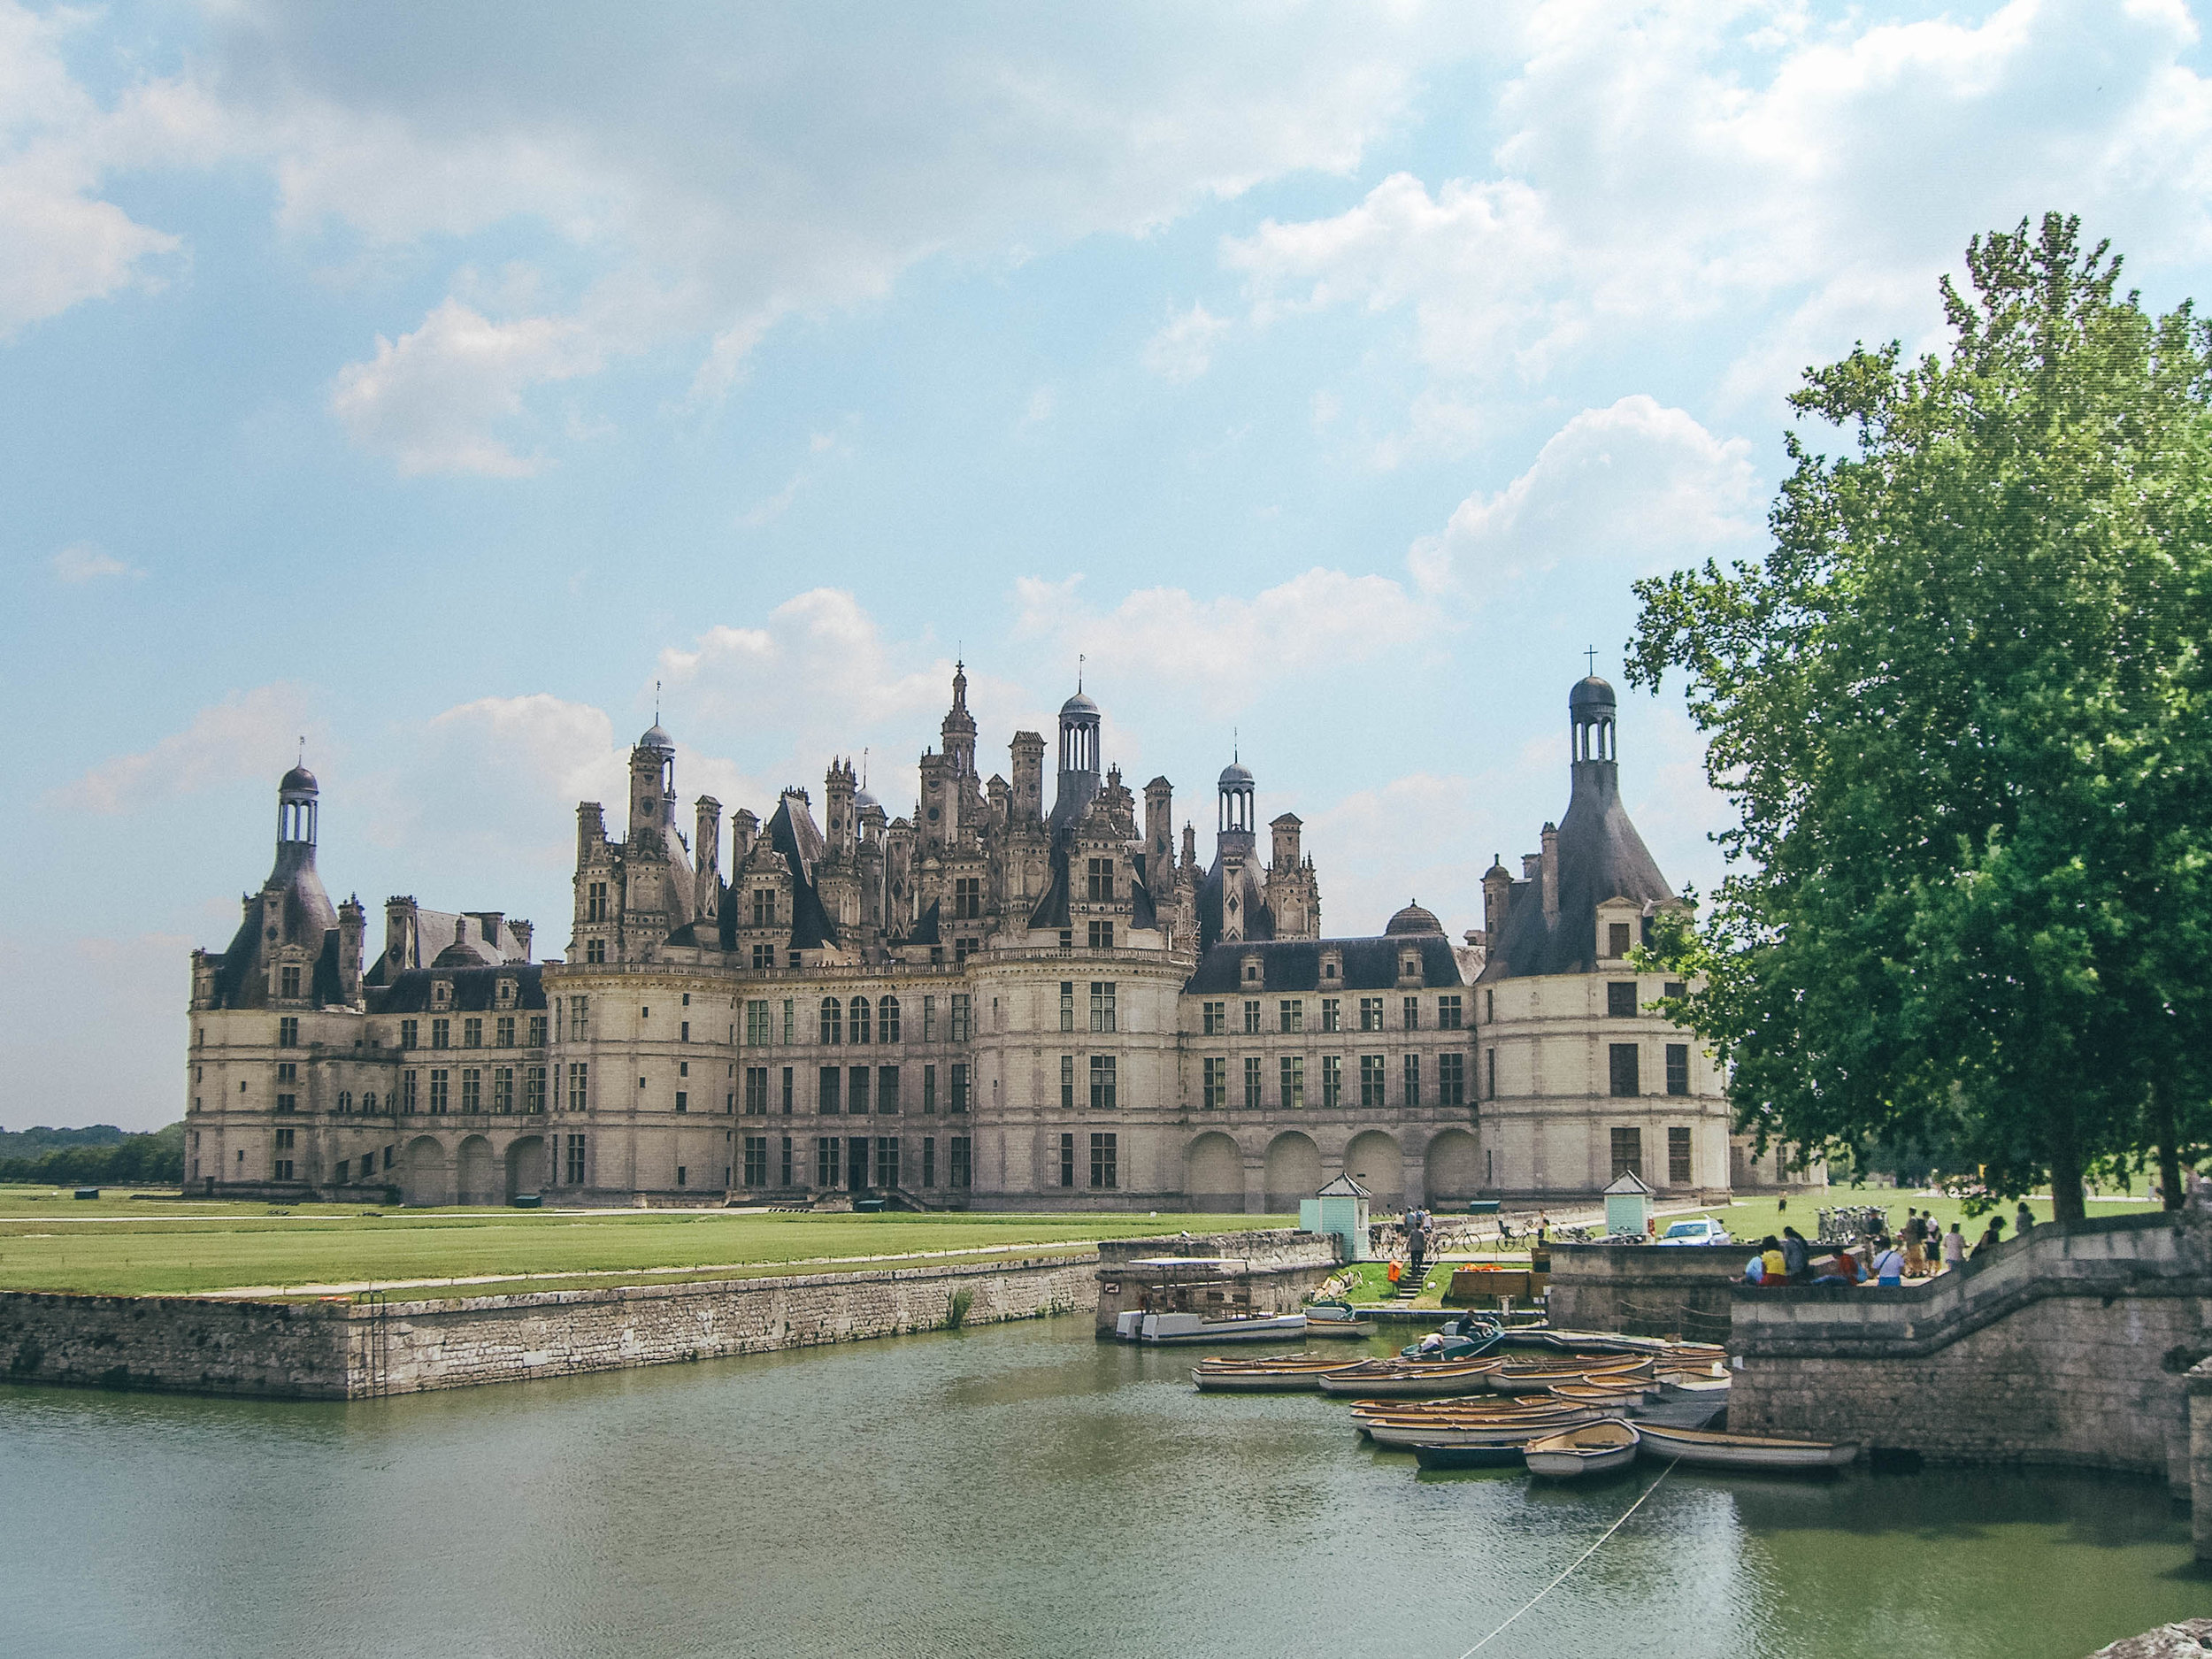 The Castle and the Canal - Chateau de Chambord - Loire Valley - France